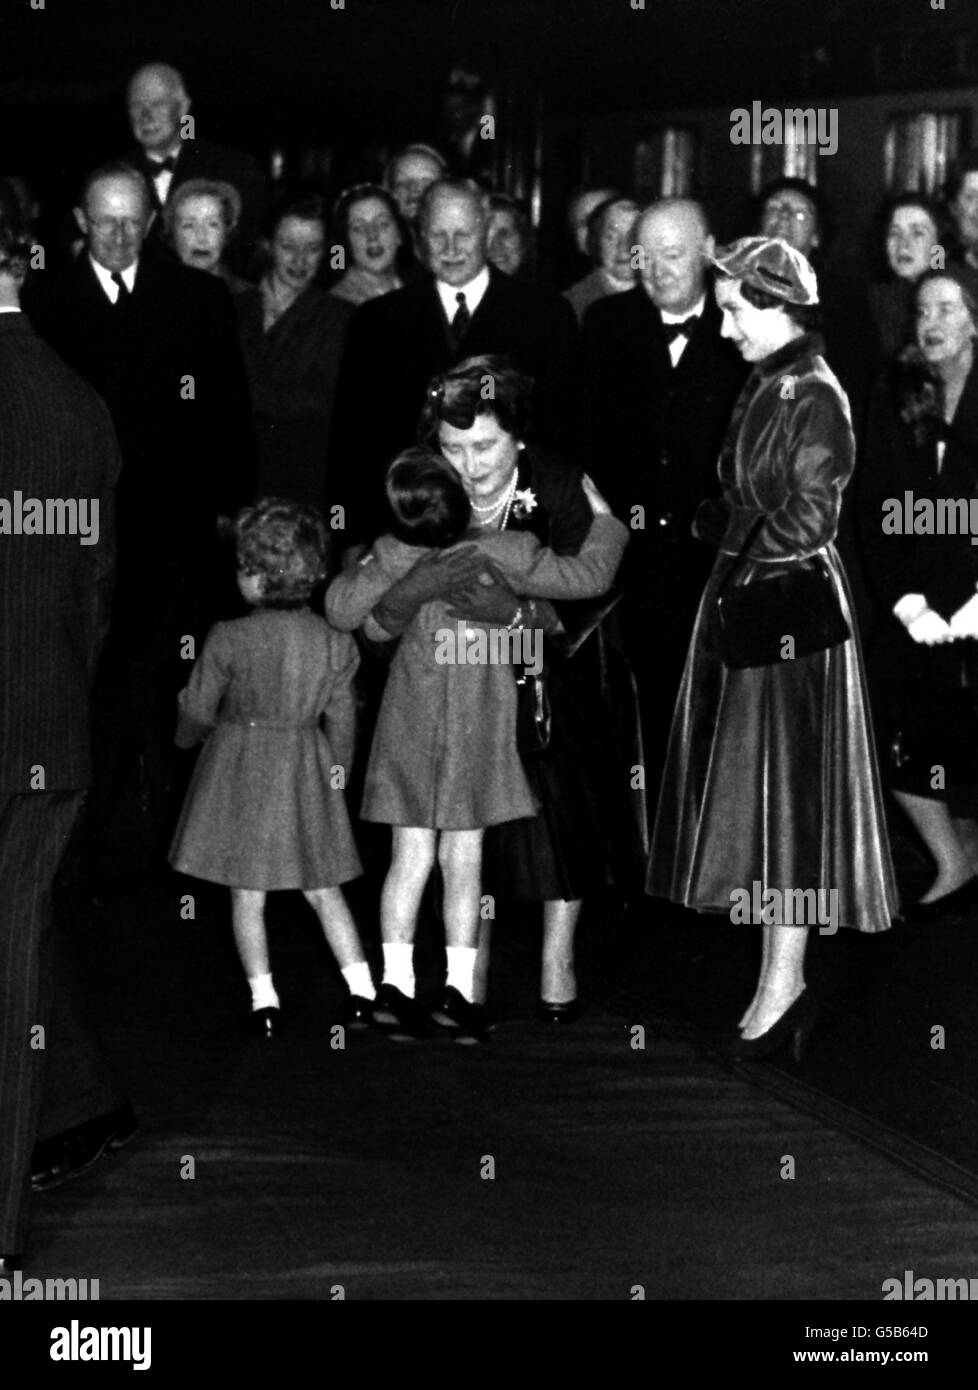 1954: The Queen Mother holds her grandson, Prince Charles, in a tight embrace which he reciprocated. The Queen Mother was about to board her train at Waterloo Station for Southampton and a trip to the USA and Canada. Also there were (l-r) Princess Anne, Sir Winston Churchill and Princess Margaret. Stock Photo